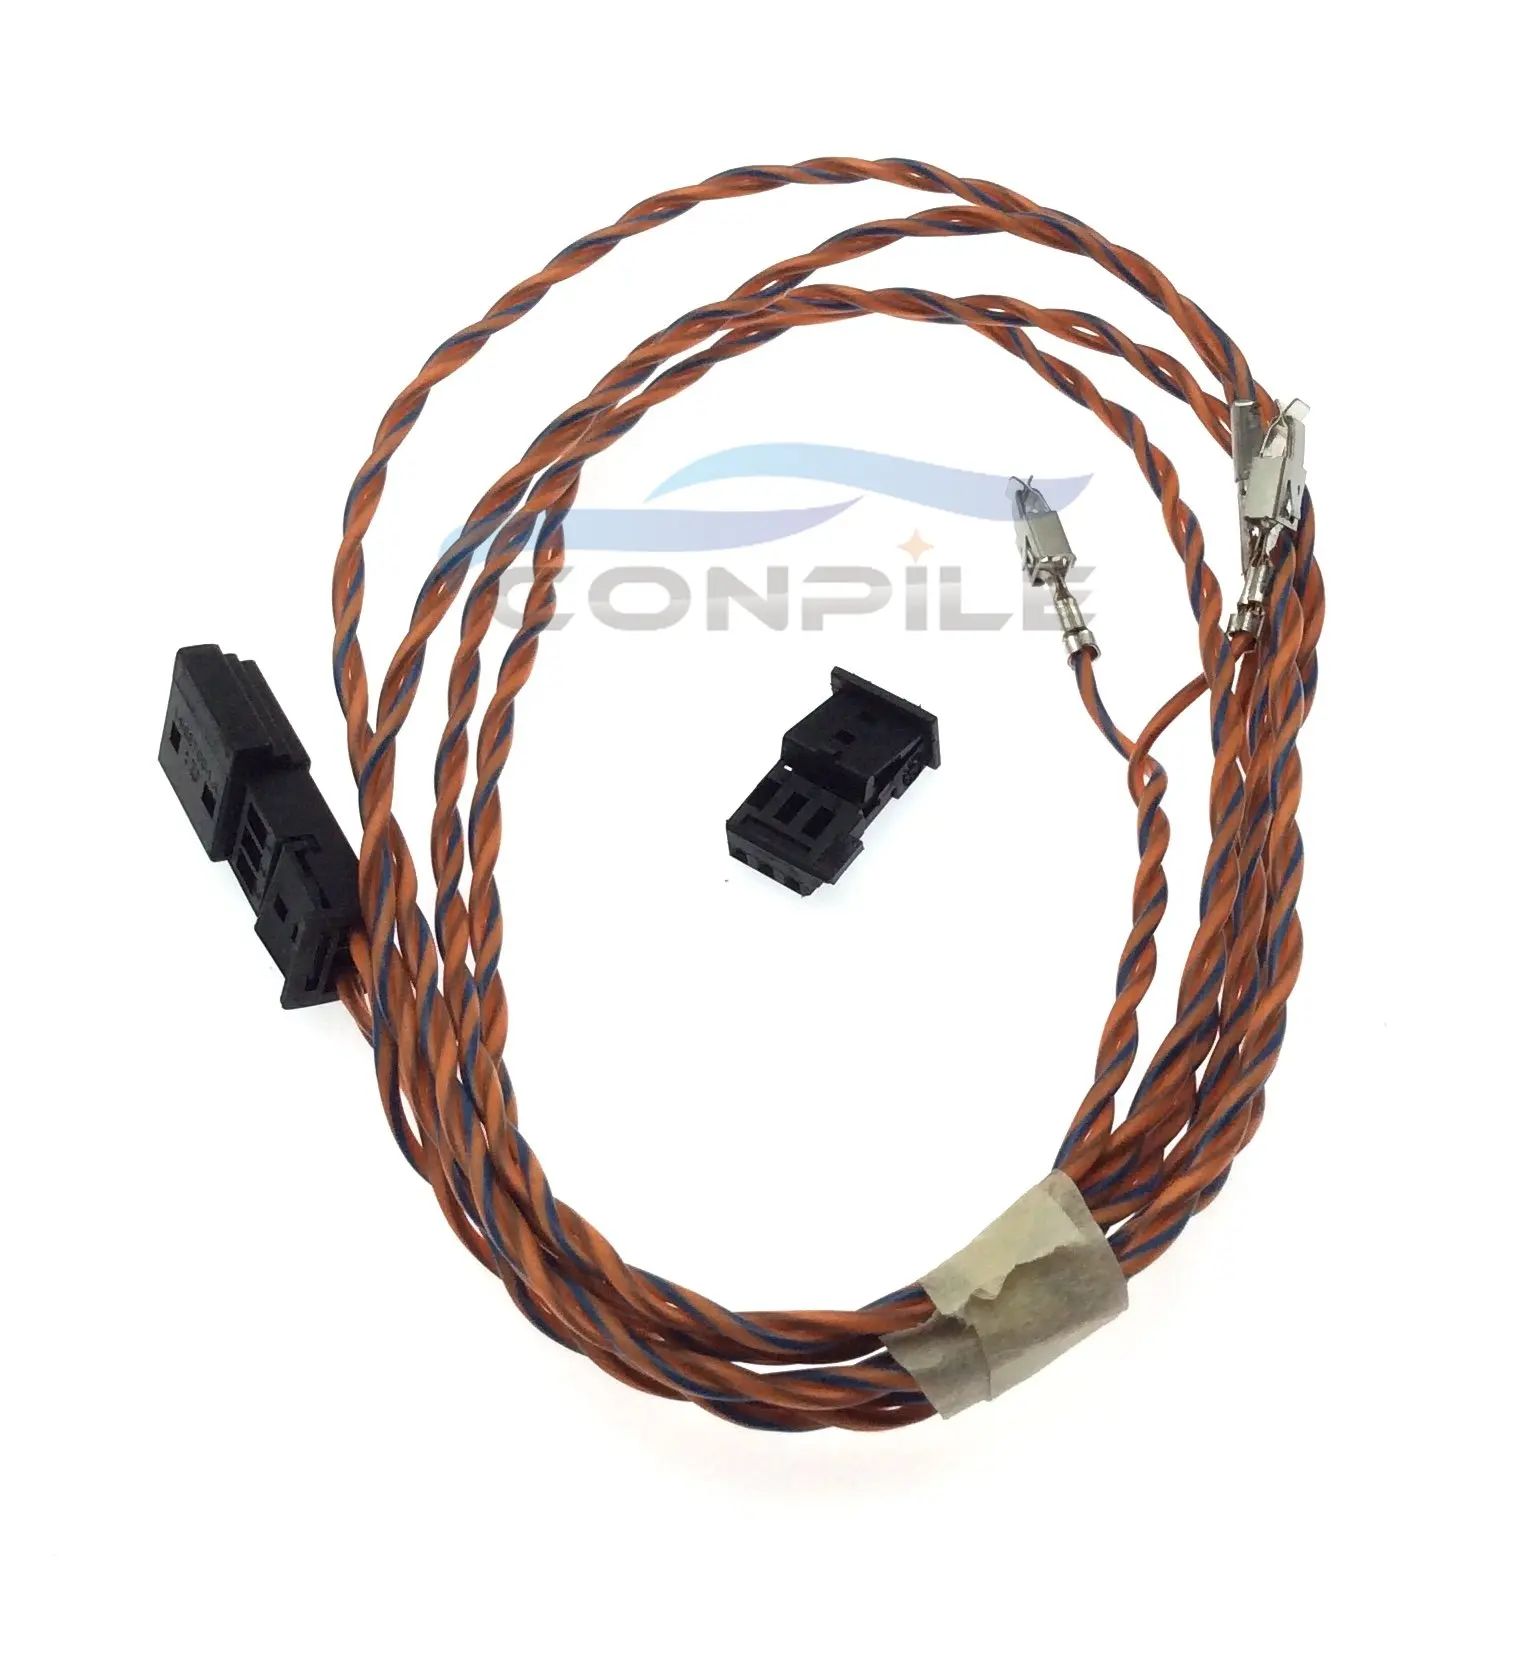 

for Volkswagen Skoda gateway can line BCM wire one to two transfer harness cable